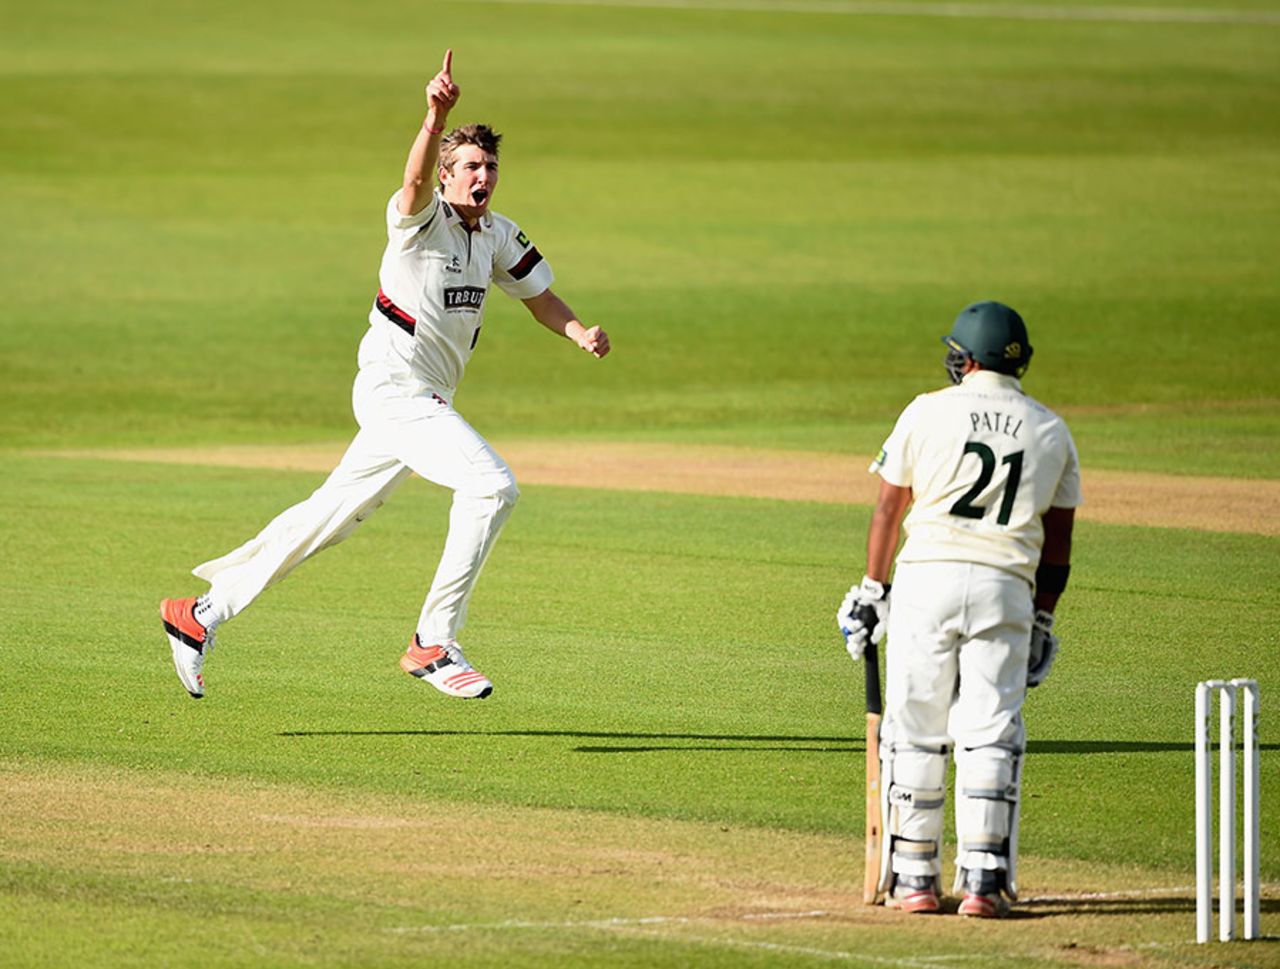 Craig Overton celebrates the wicket of Samit Patel, Nottinghamshire v Somerset, County Championship, Division One, Trent Bridge, 3rd day, May 19, 2015